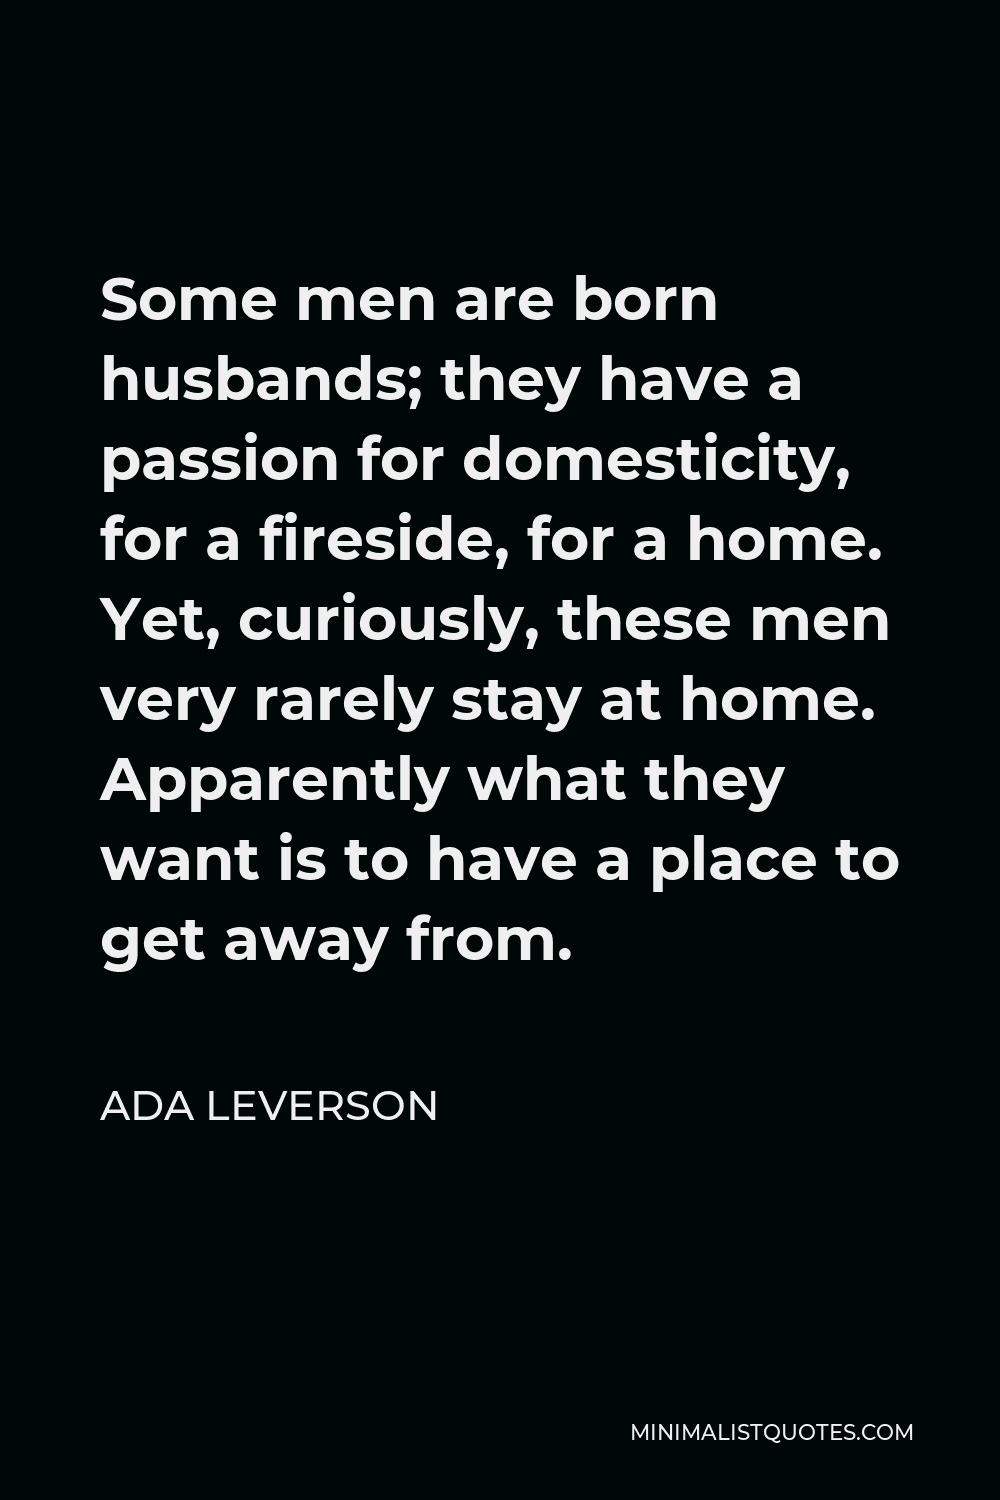 Ada Leverson Quote - Some men are born husbands; they have a passion for domesticity, for a fireside, for a home. Yet, curiously, these men very rarely stay at home. Apparently what they want is to have a place to get away from.